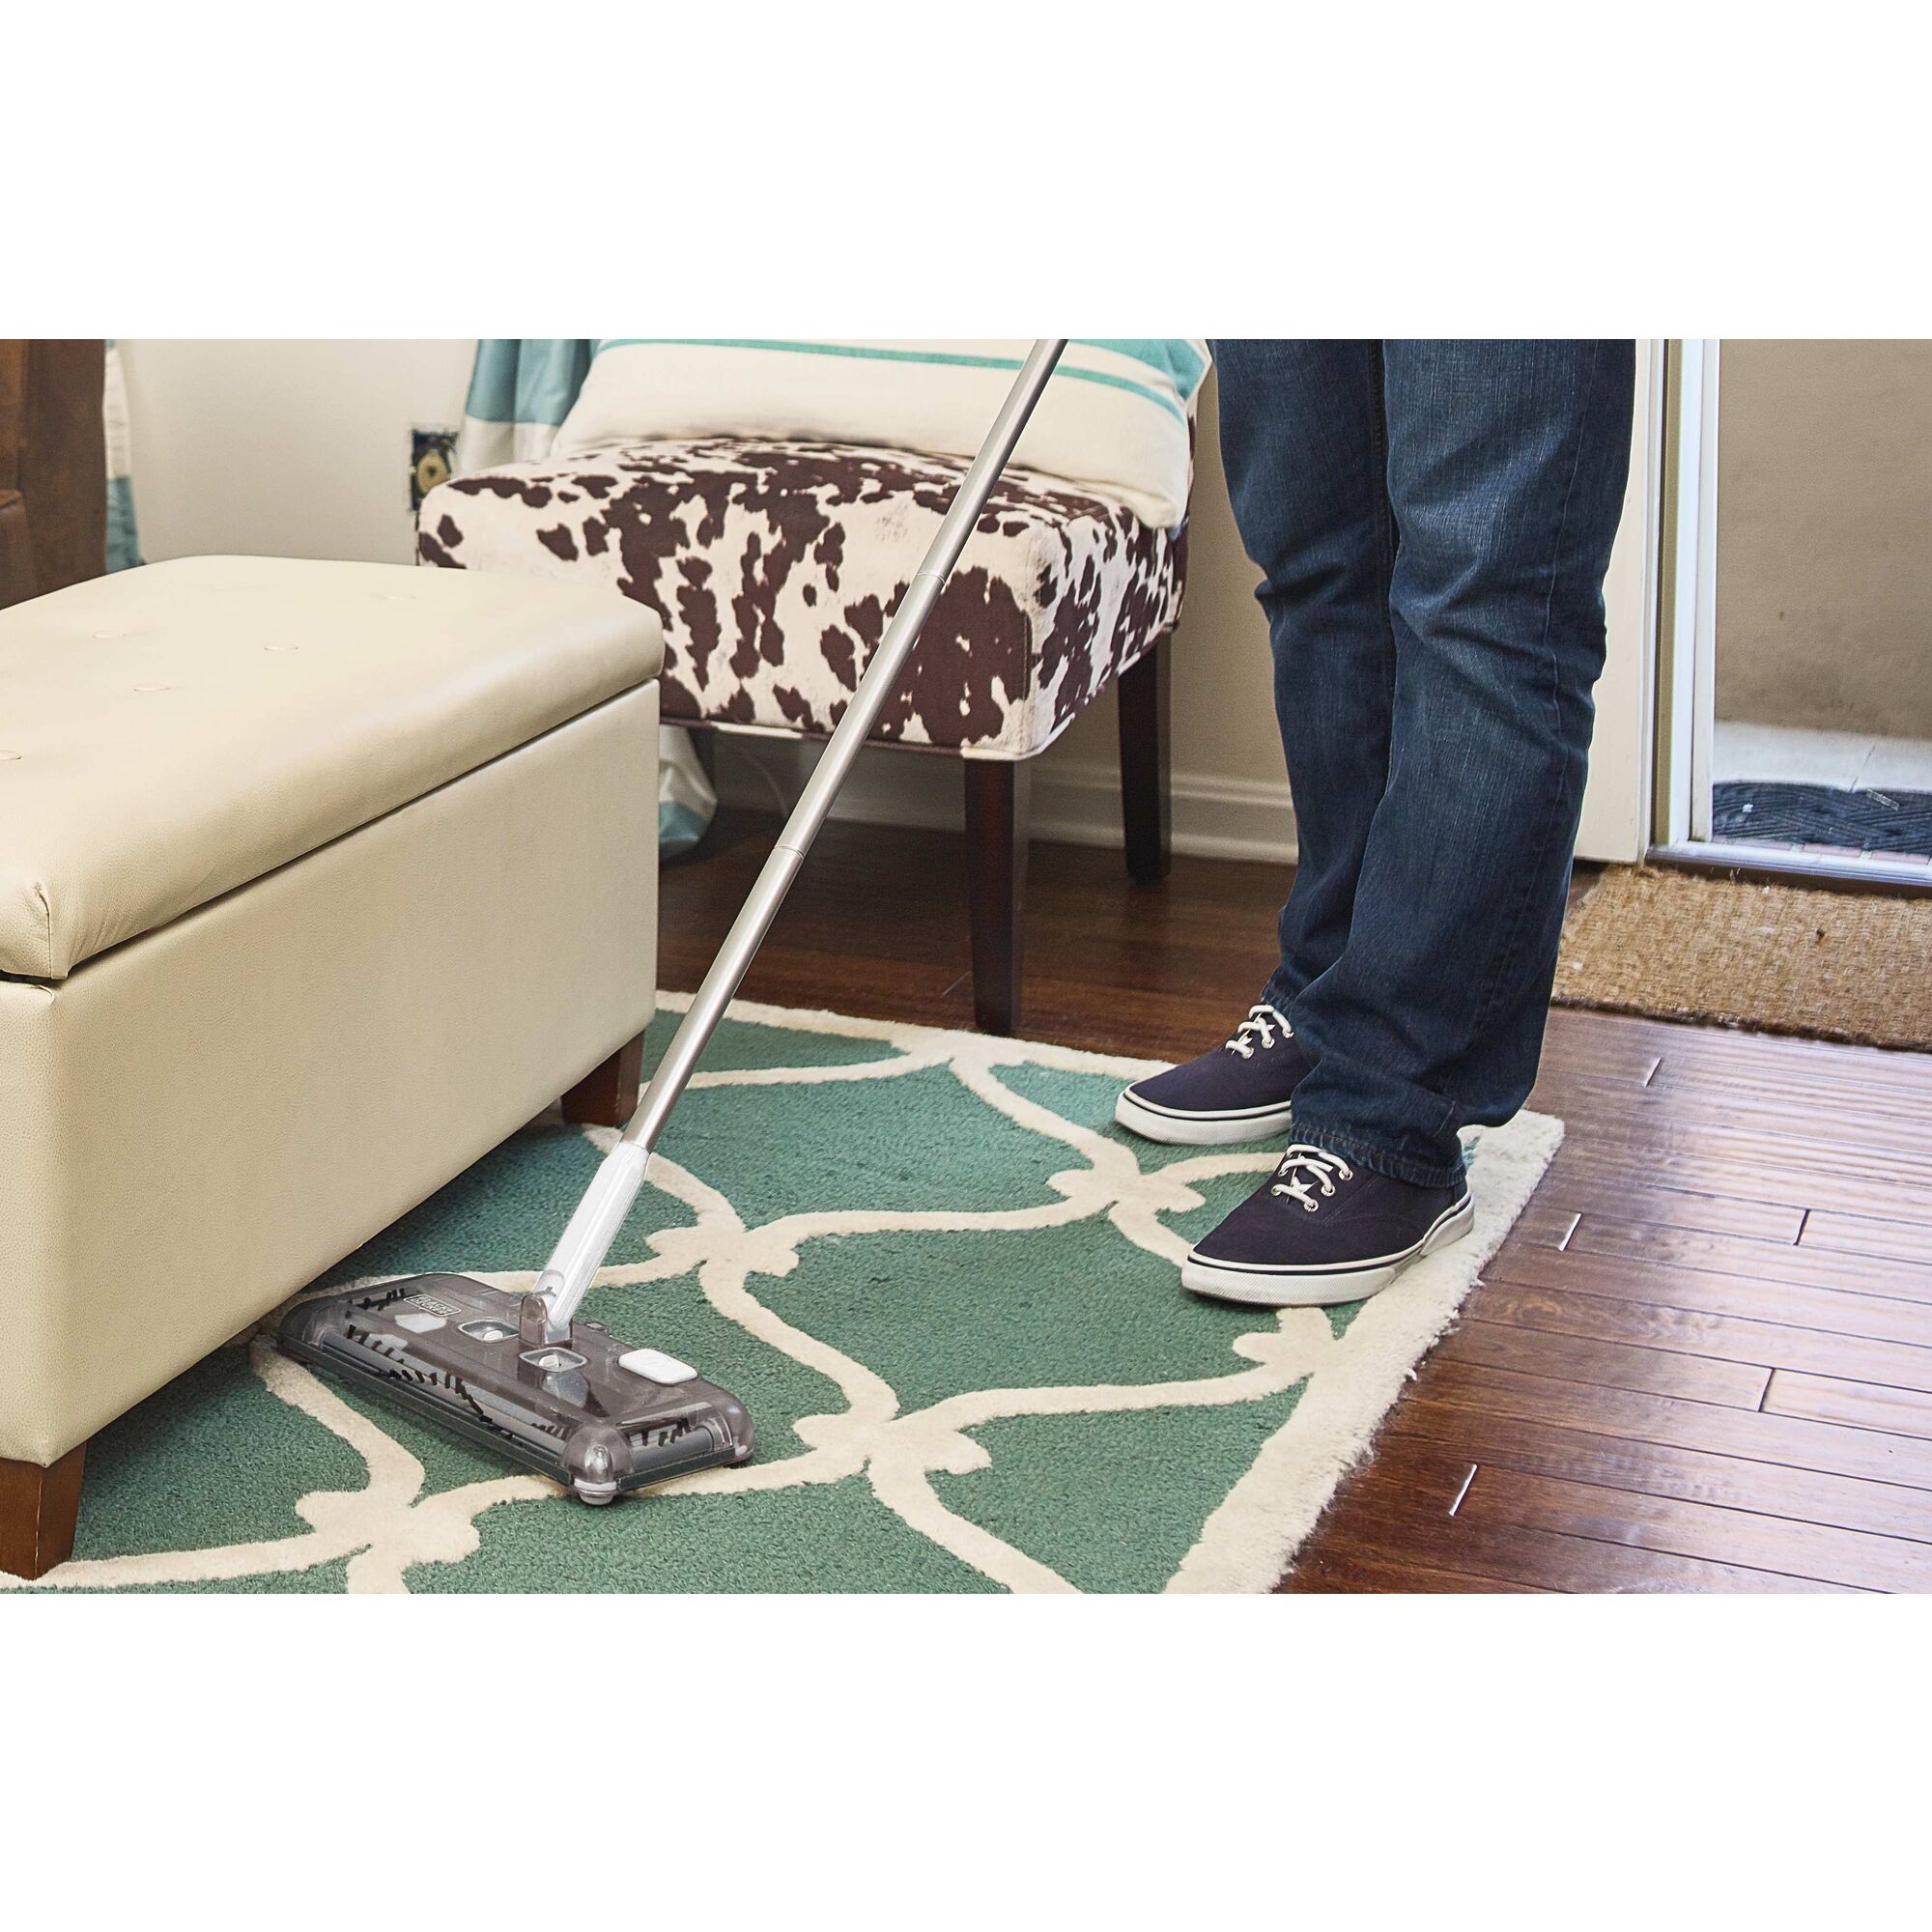 Person using black and decker 50 Minute Powered Floor Sweeper to clean rug